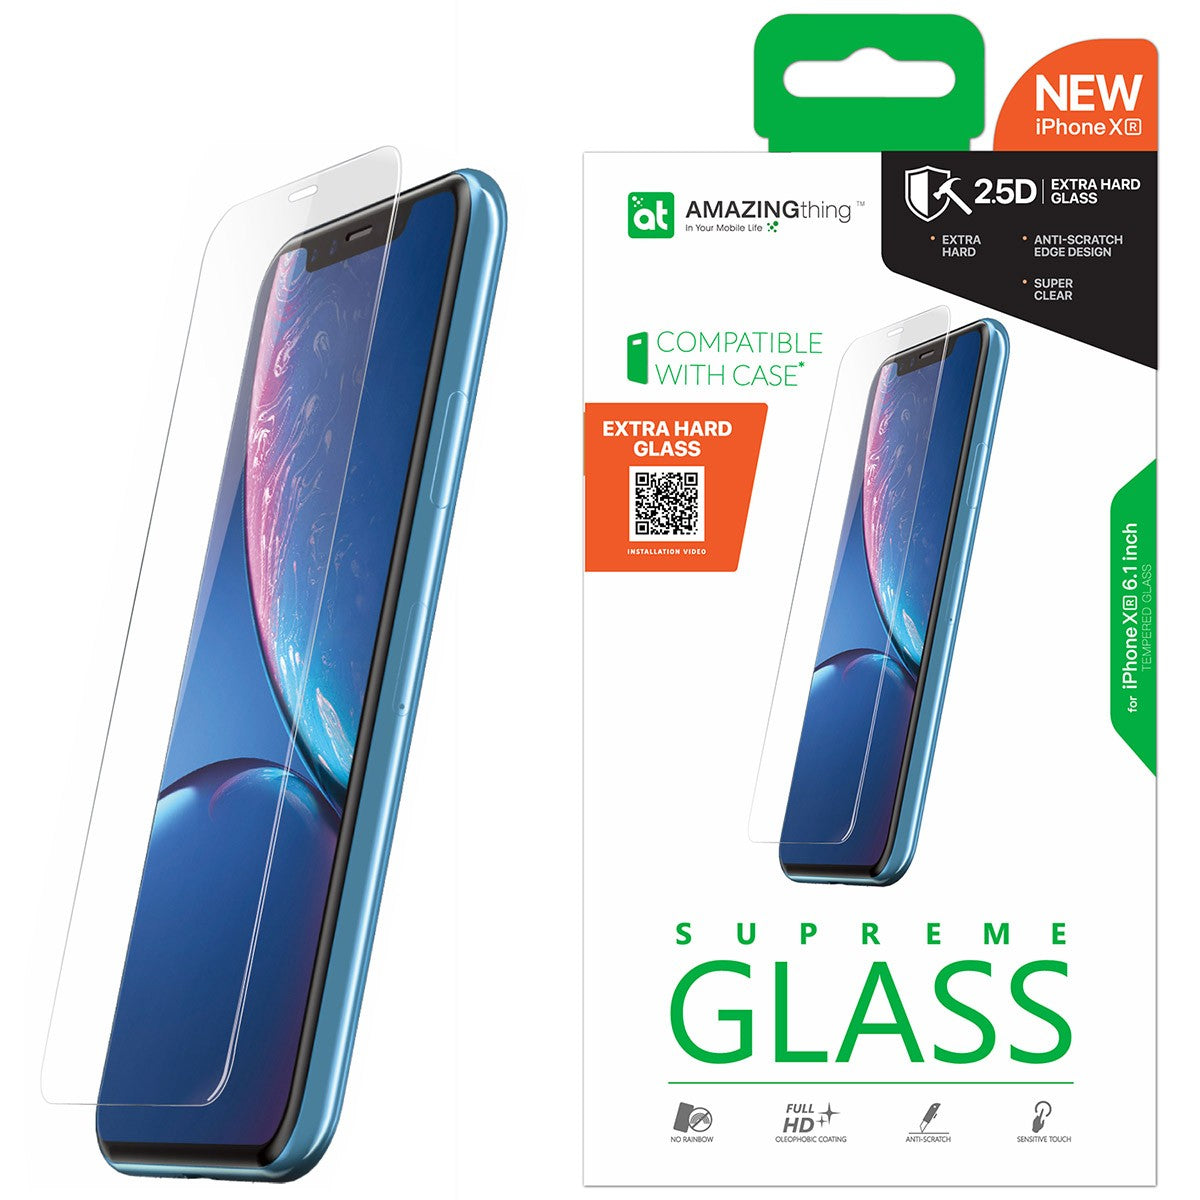 Amazing Thing iPhone XR EXTRA HARD Glass Screen Protector - Tempered Supreme Glass